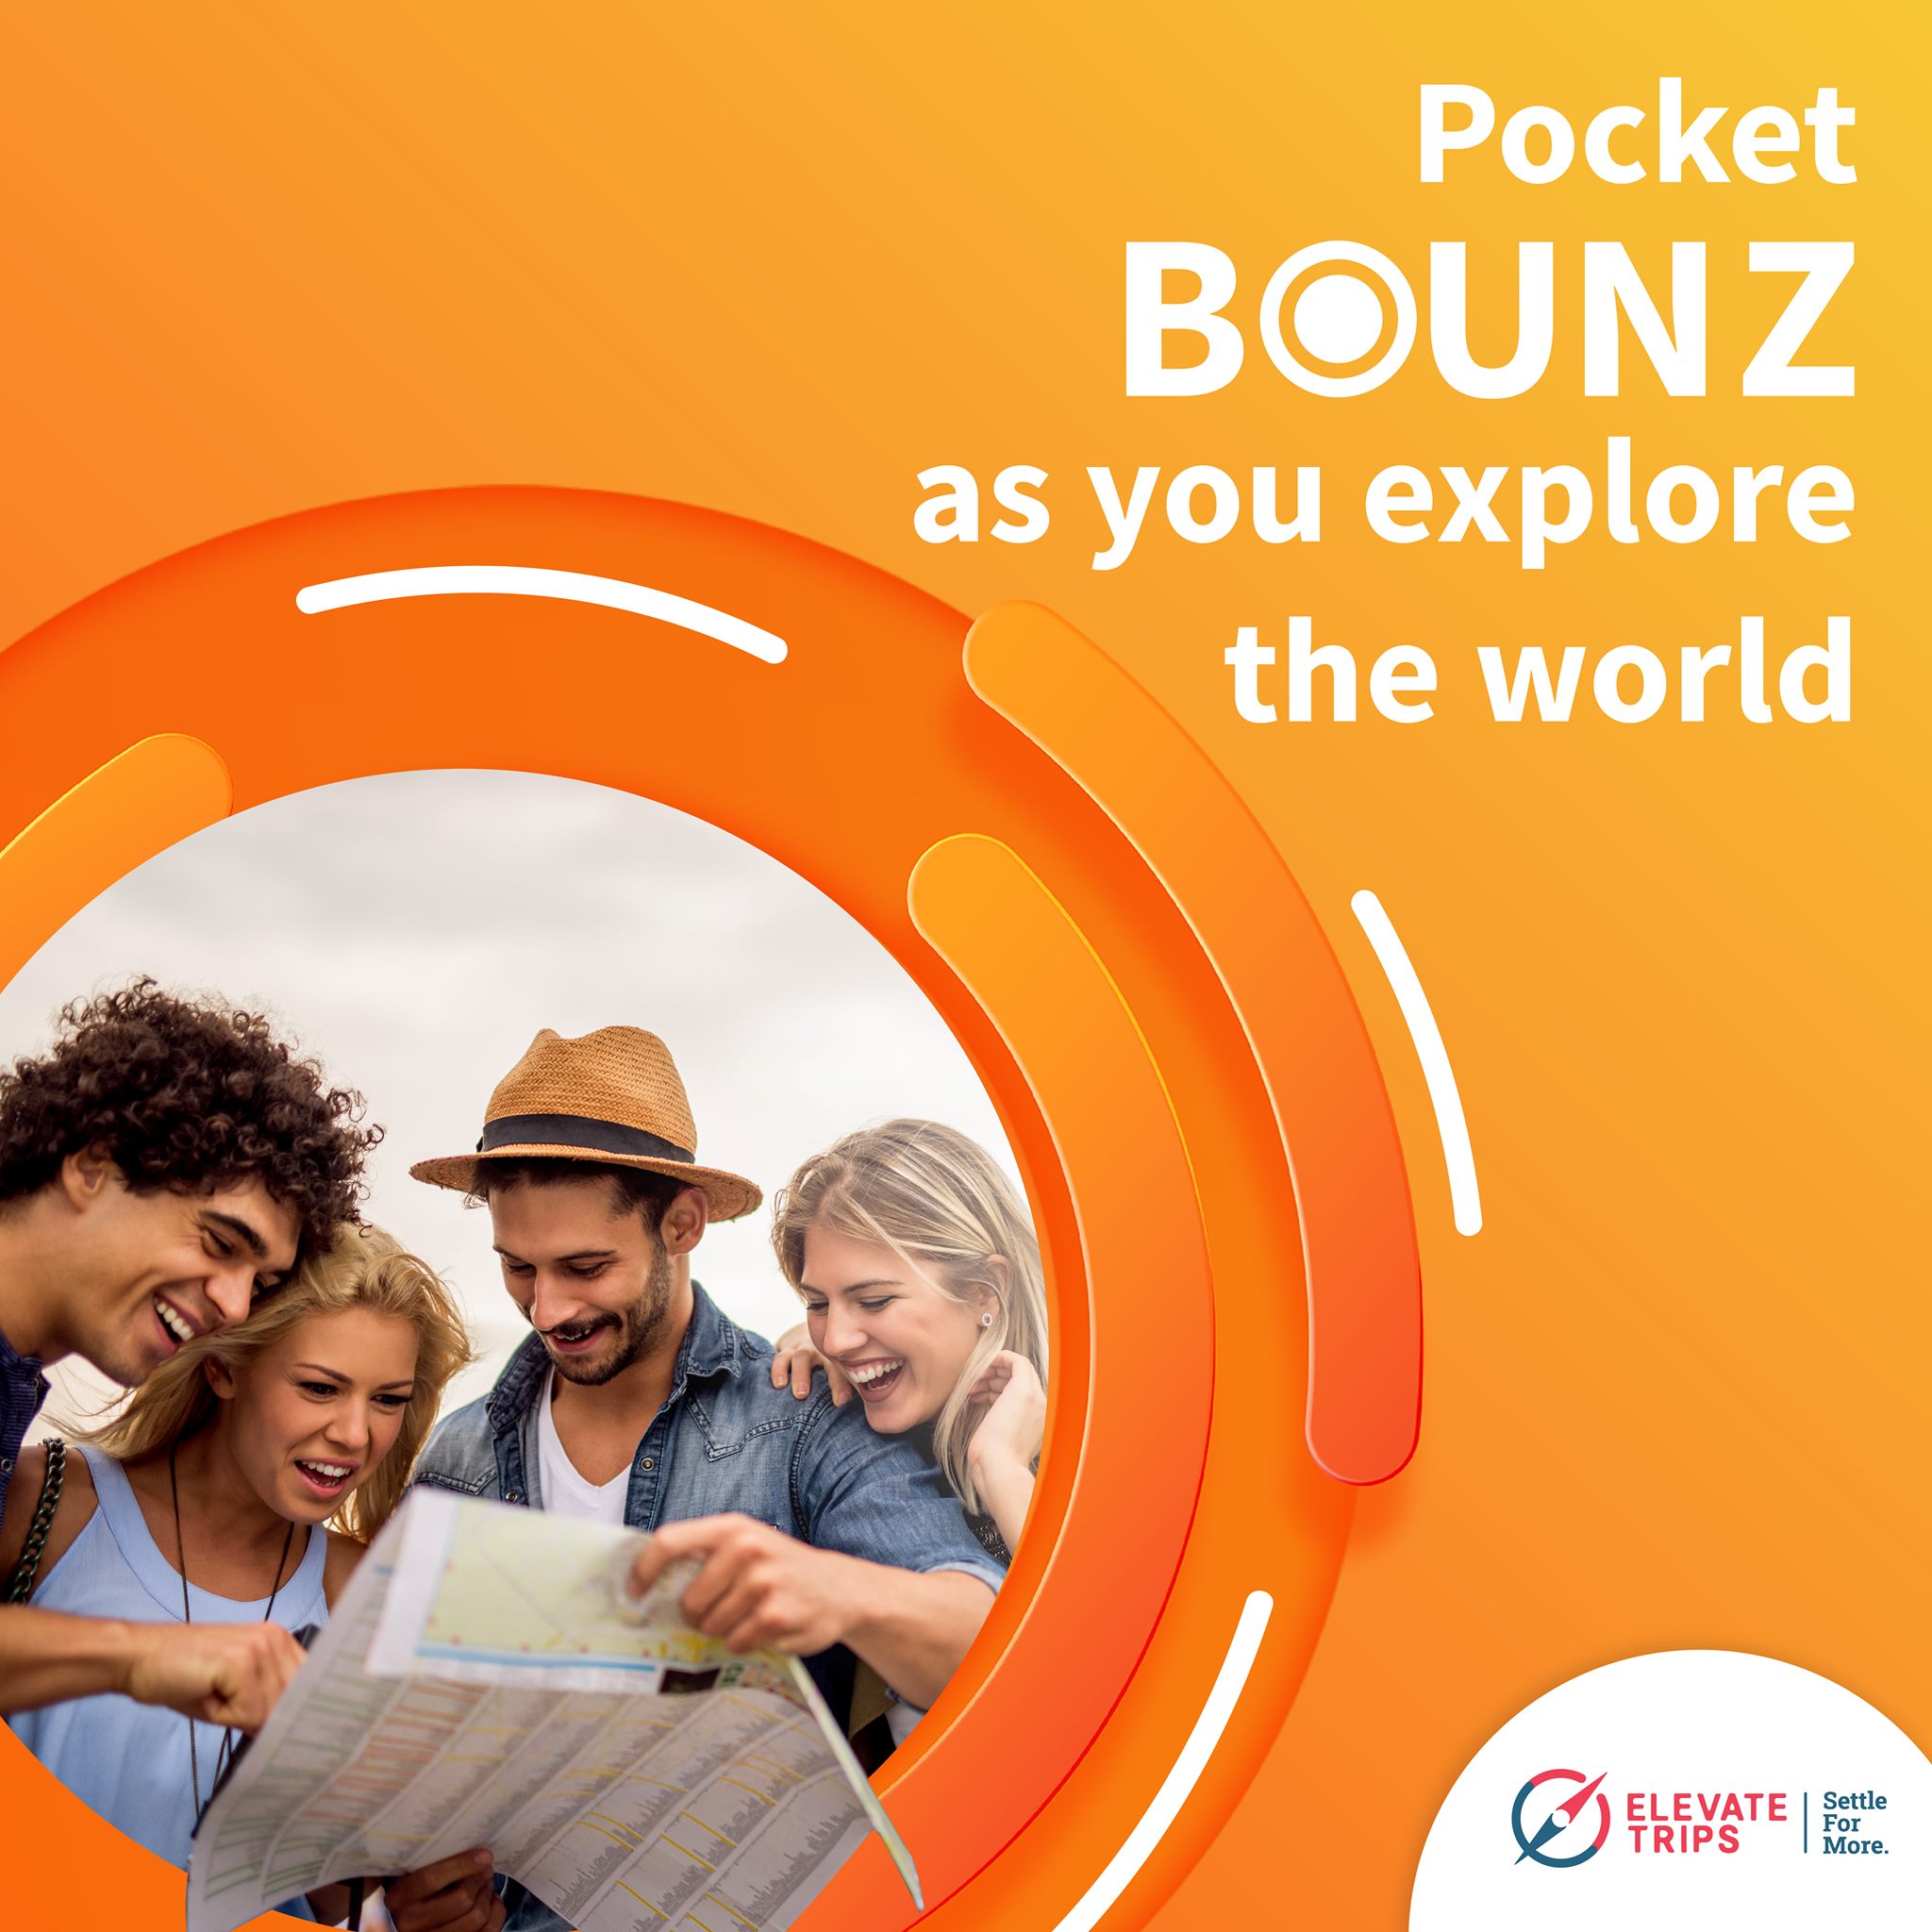 Download BOUNZ App and Save Big on Your Shopping, Travel, and More